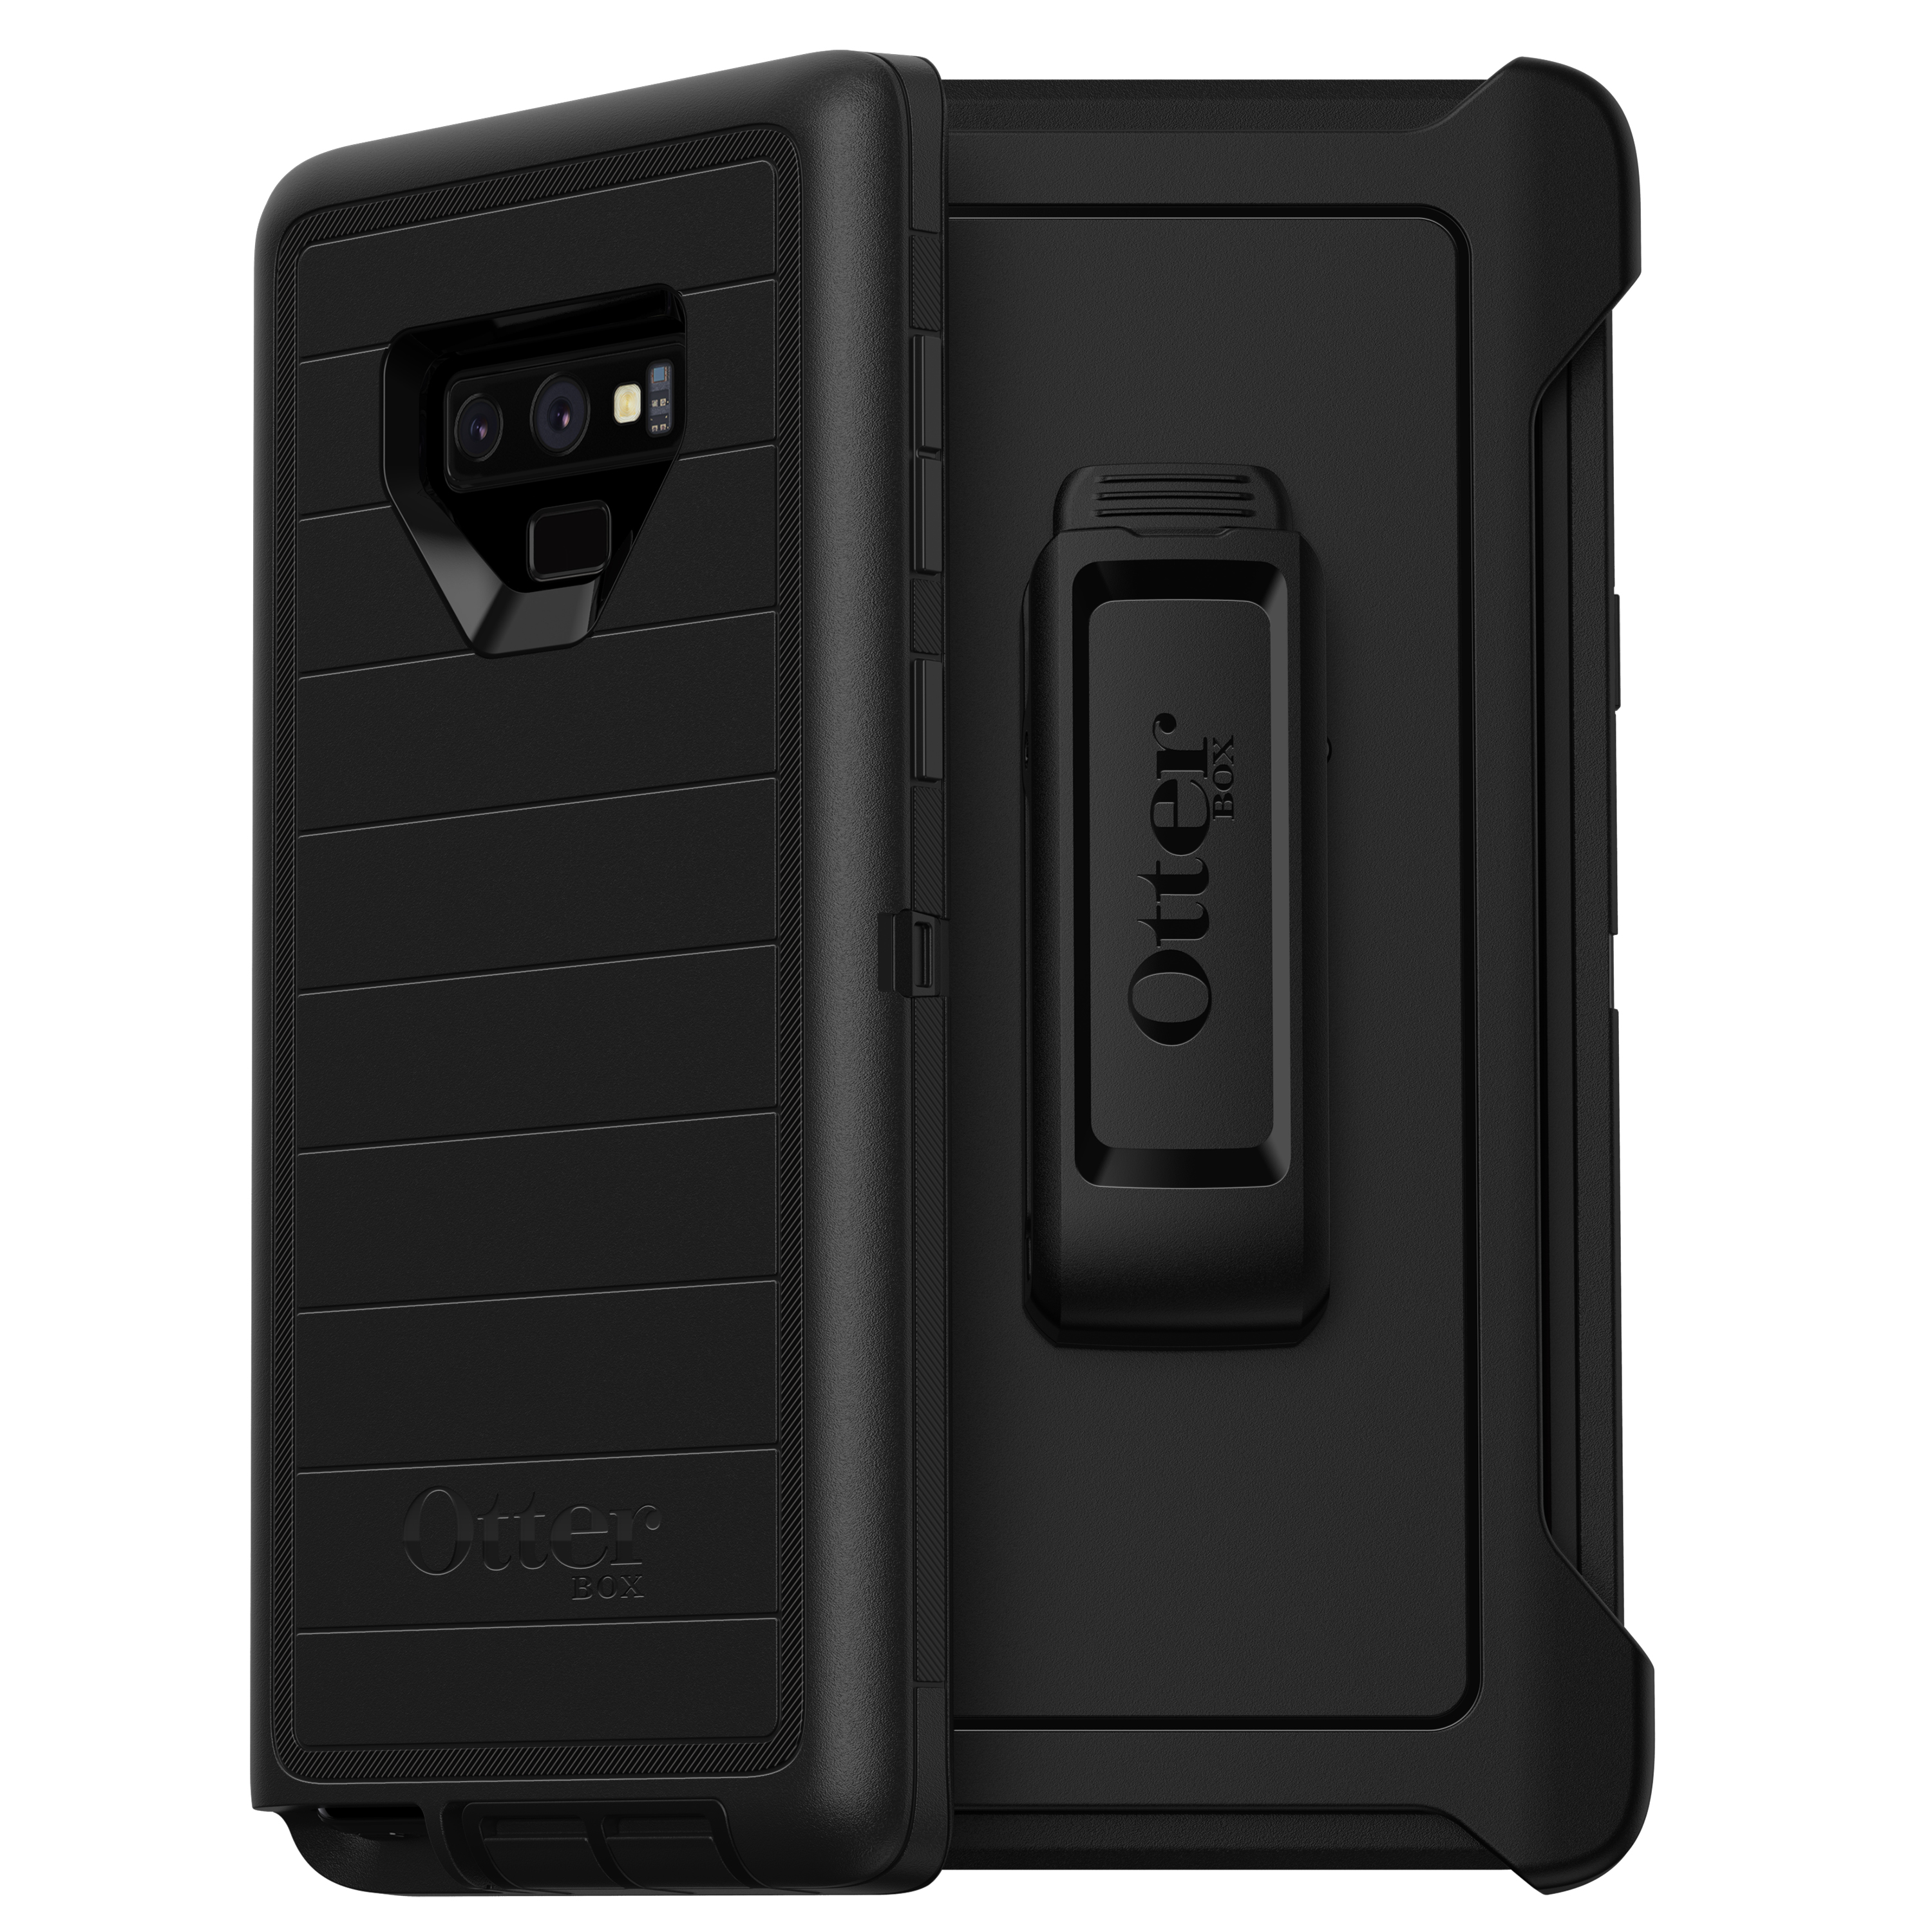 OtterBox Defender Series Pro Phone Case for Samsung Galaxy Note 9 - Black - image 1 of 10